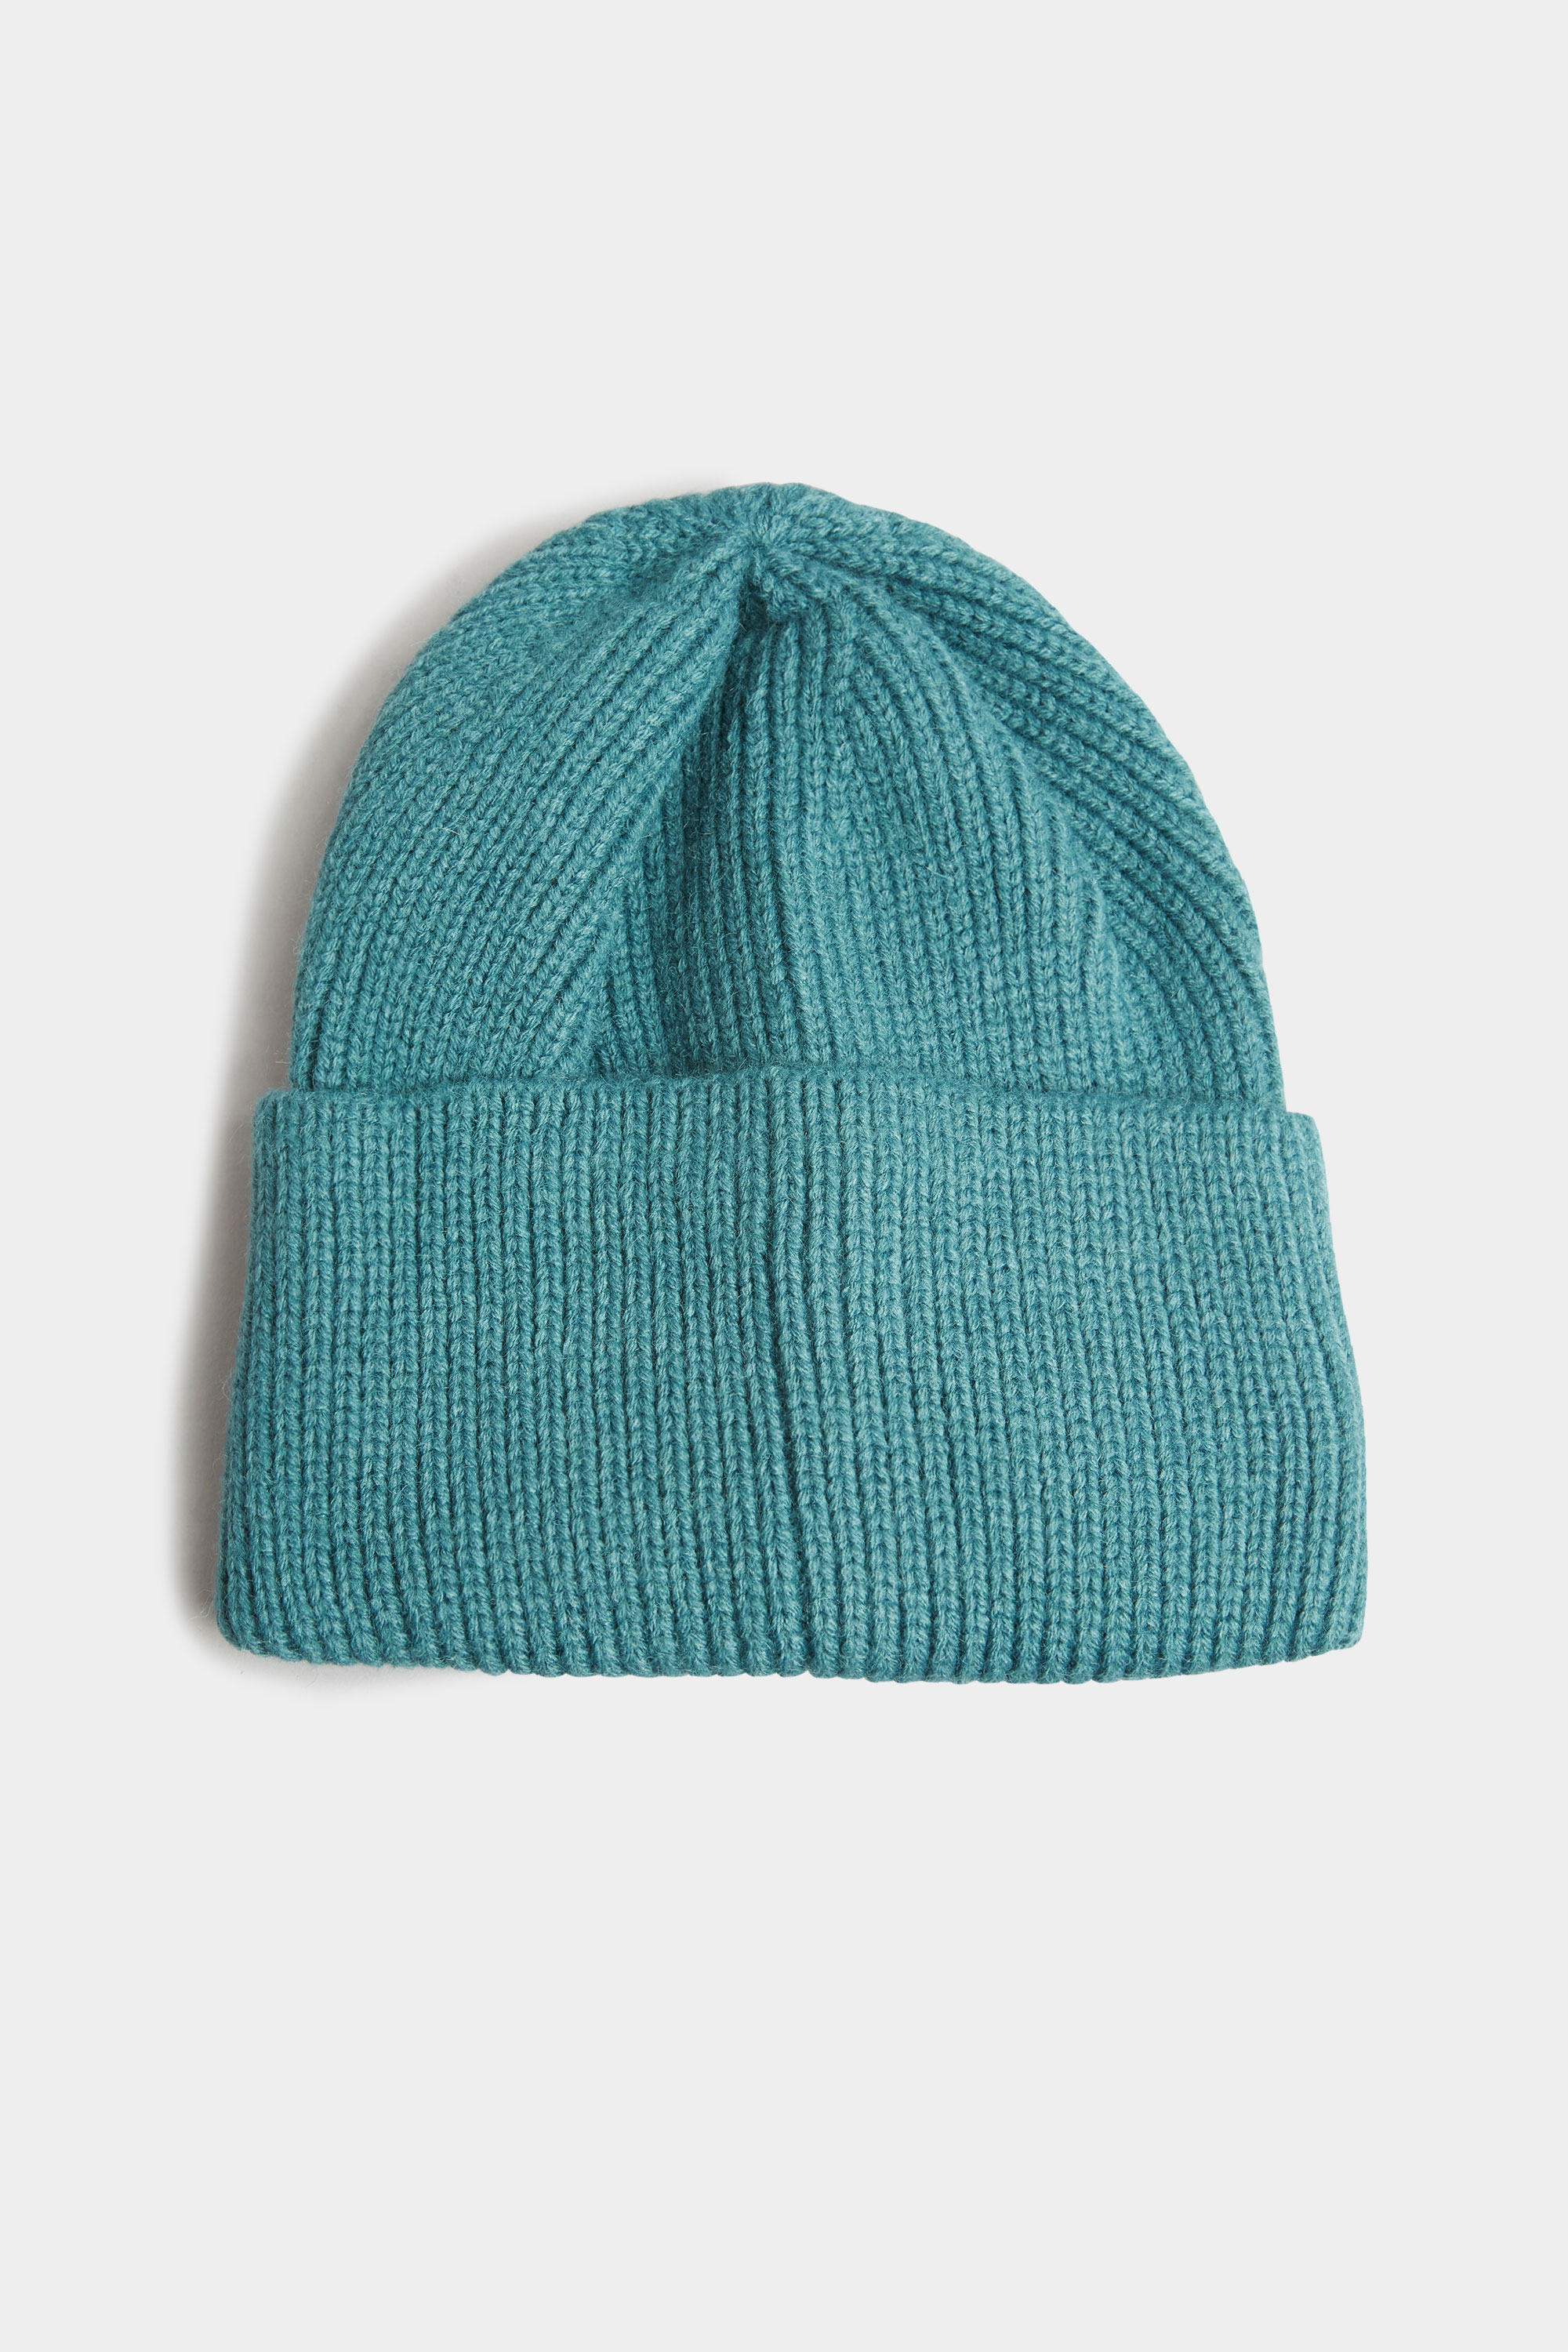 Teal Blue Knitted Soft Touch Beanie Hat_A.jpg